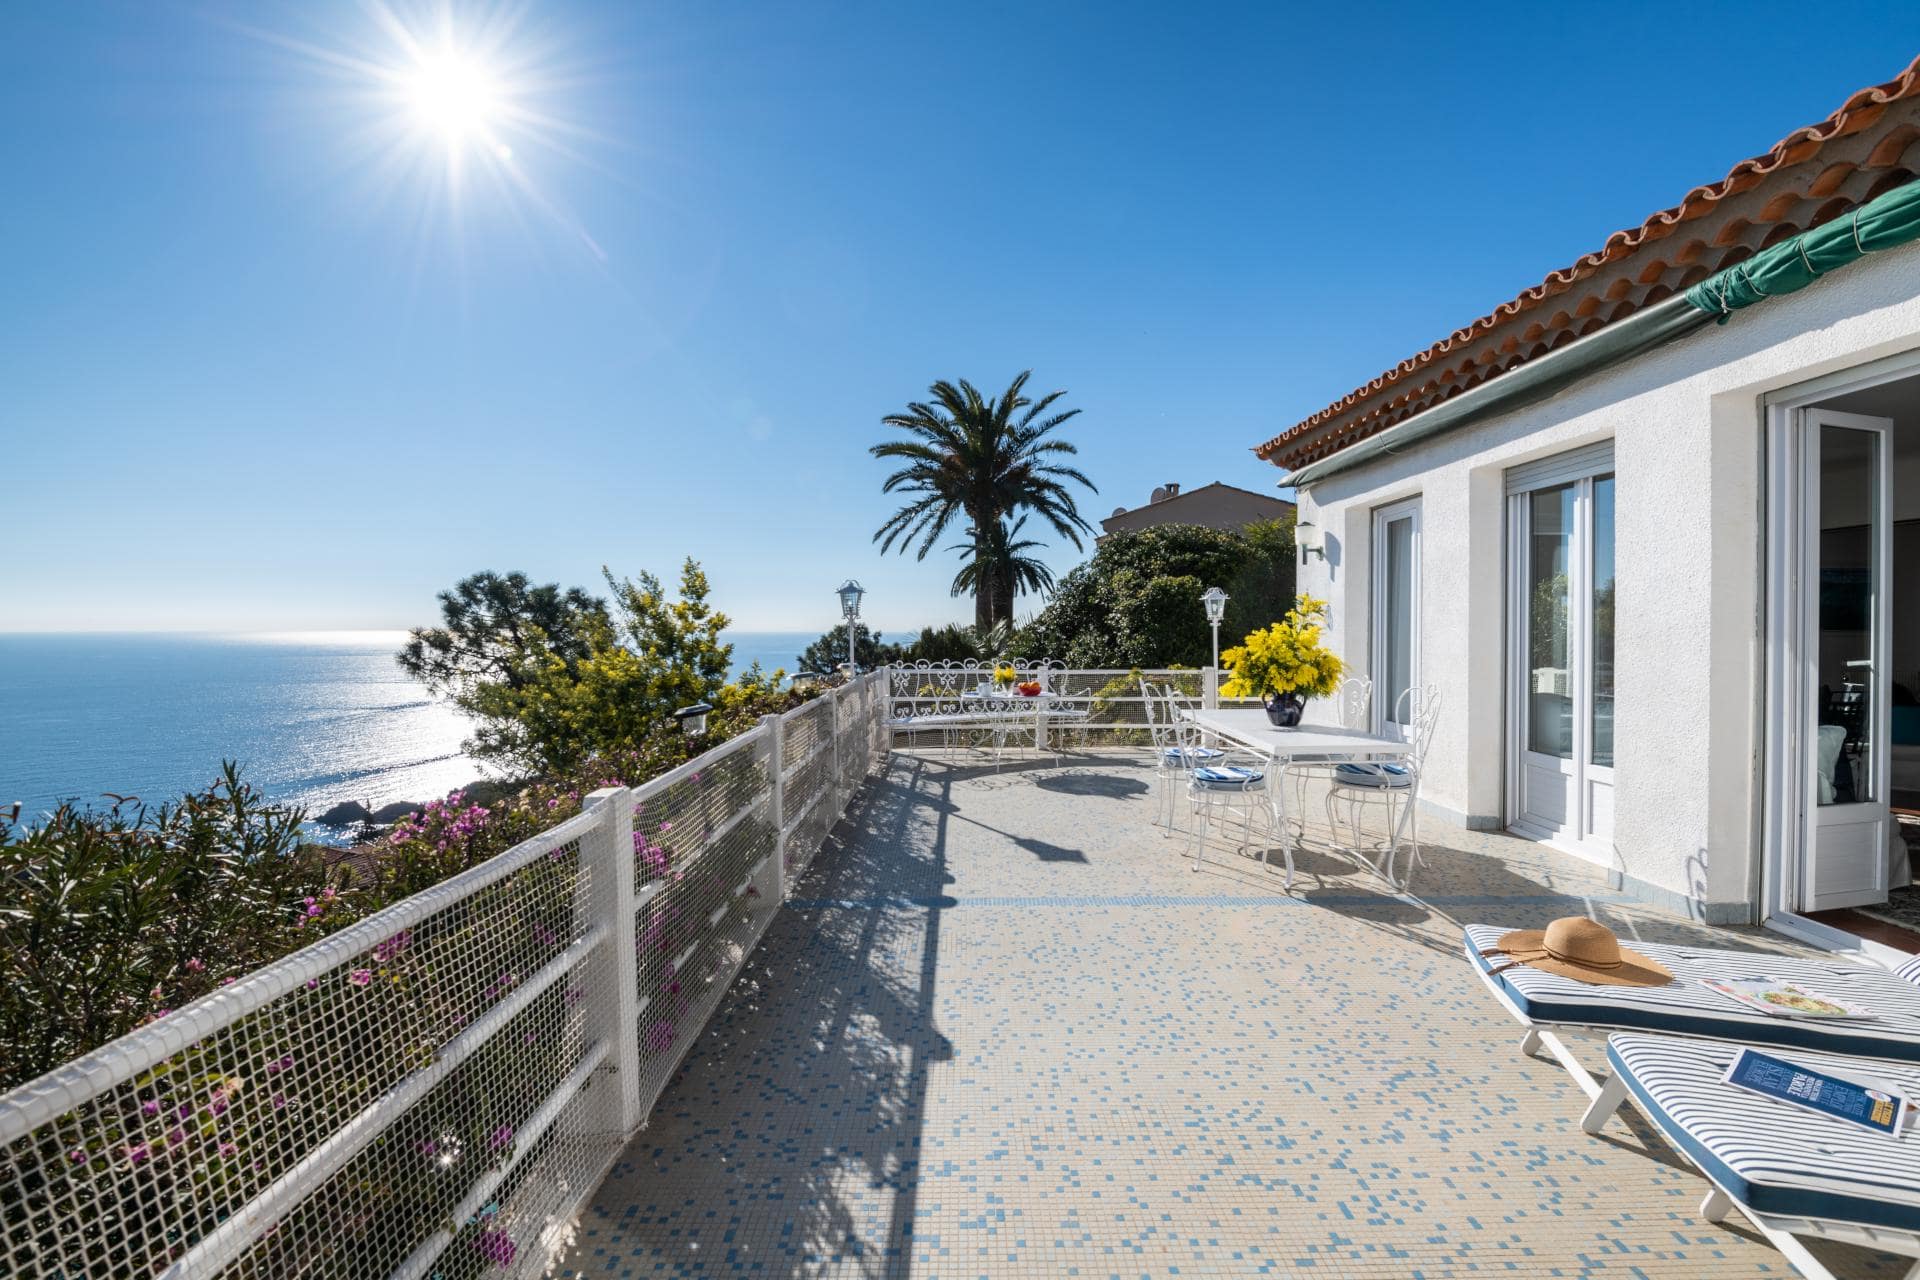 Looking for idyllic accommodation on the Cote d’Azur? Look no further than Vue Lérins